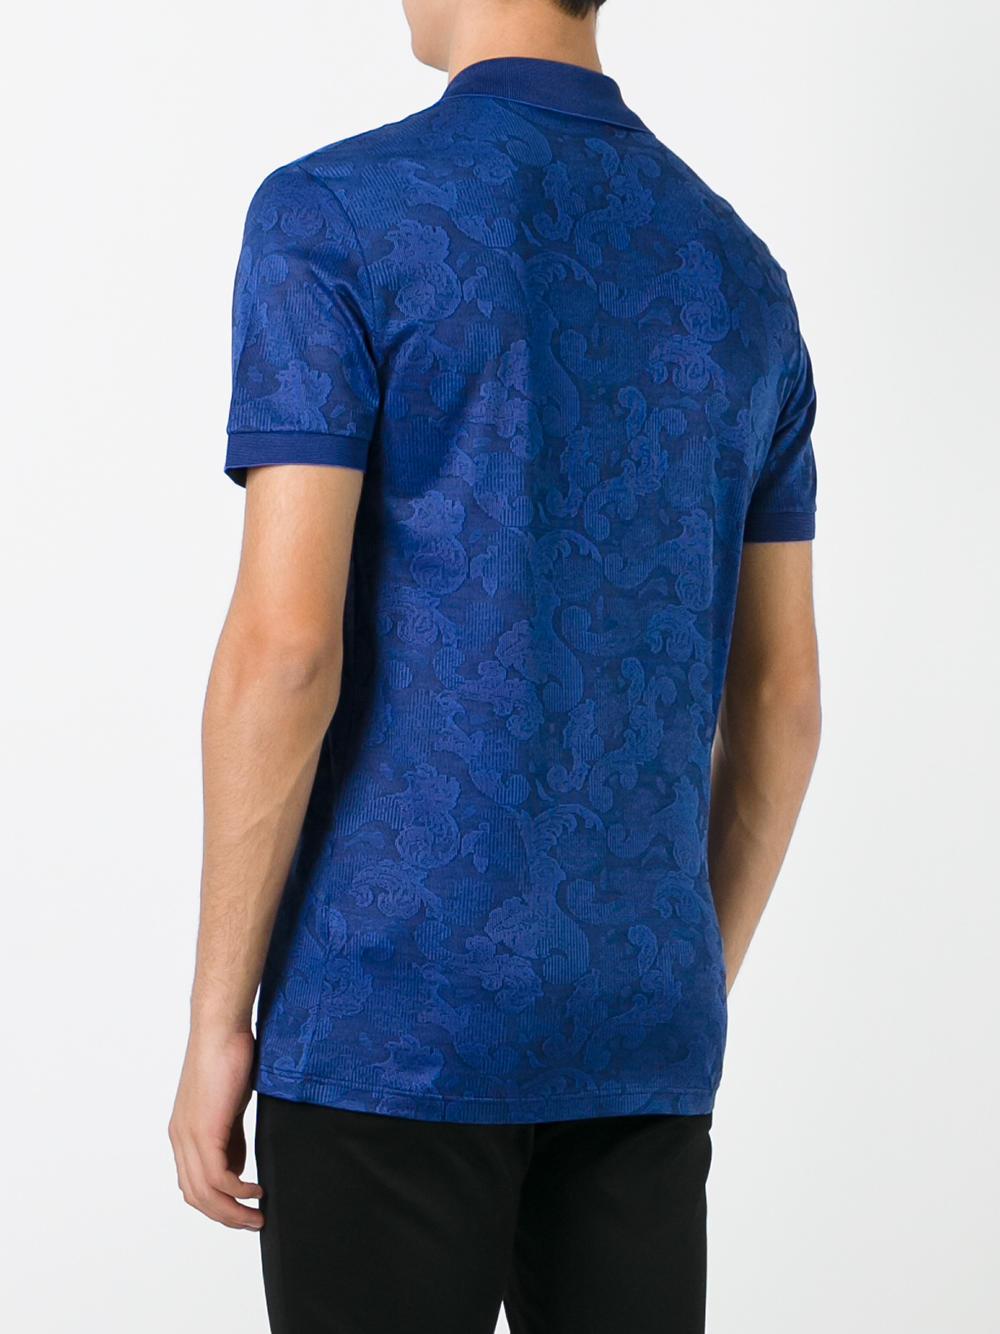 Lyst - Versace Patterned Polo Shirt in Blue for Men